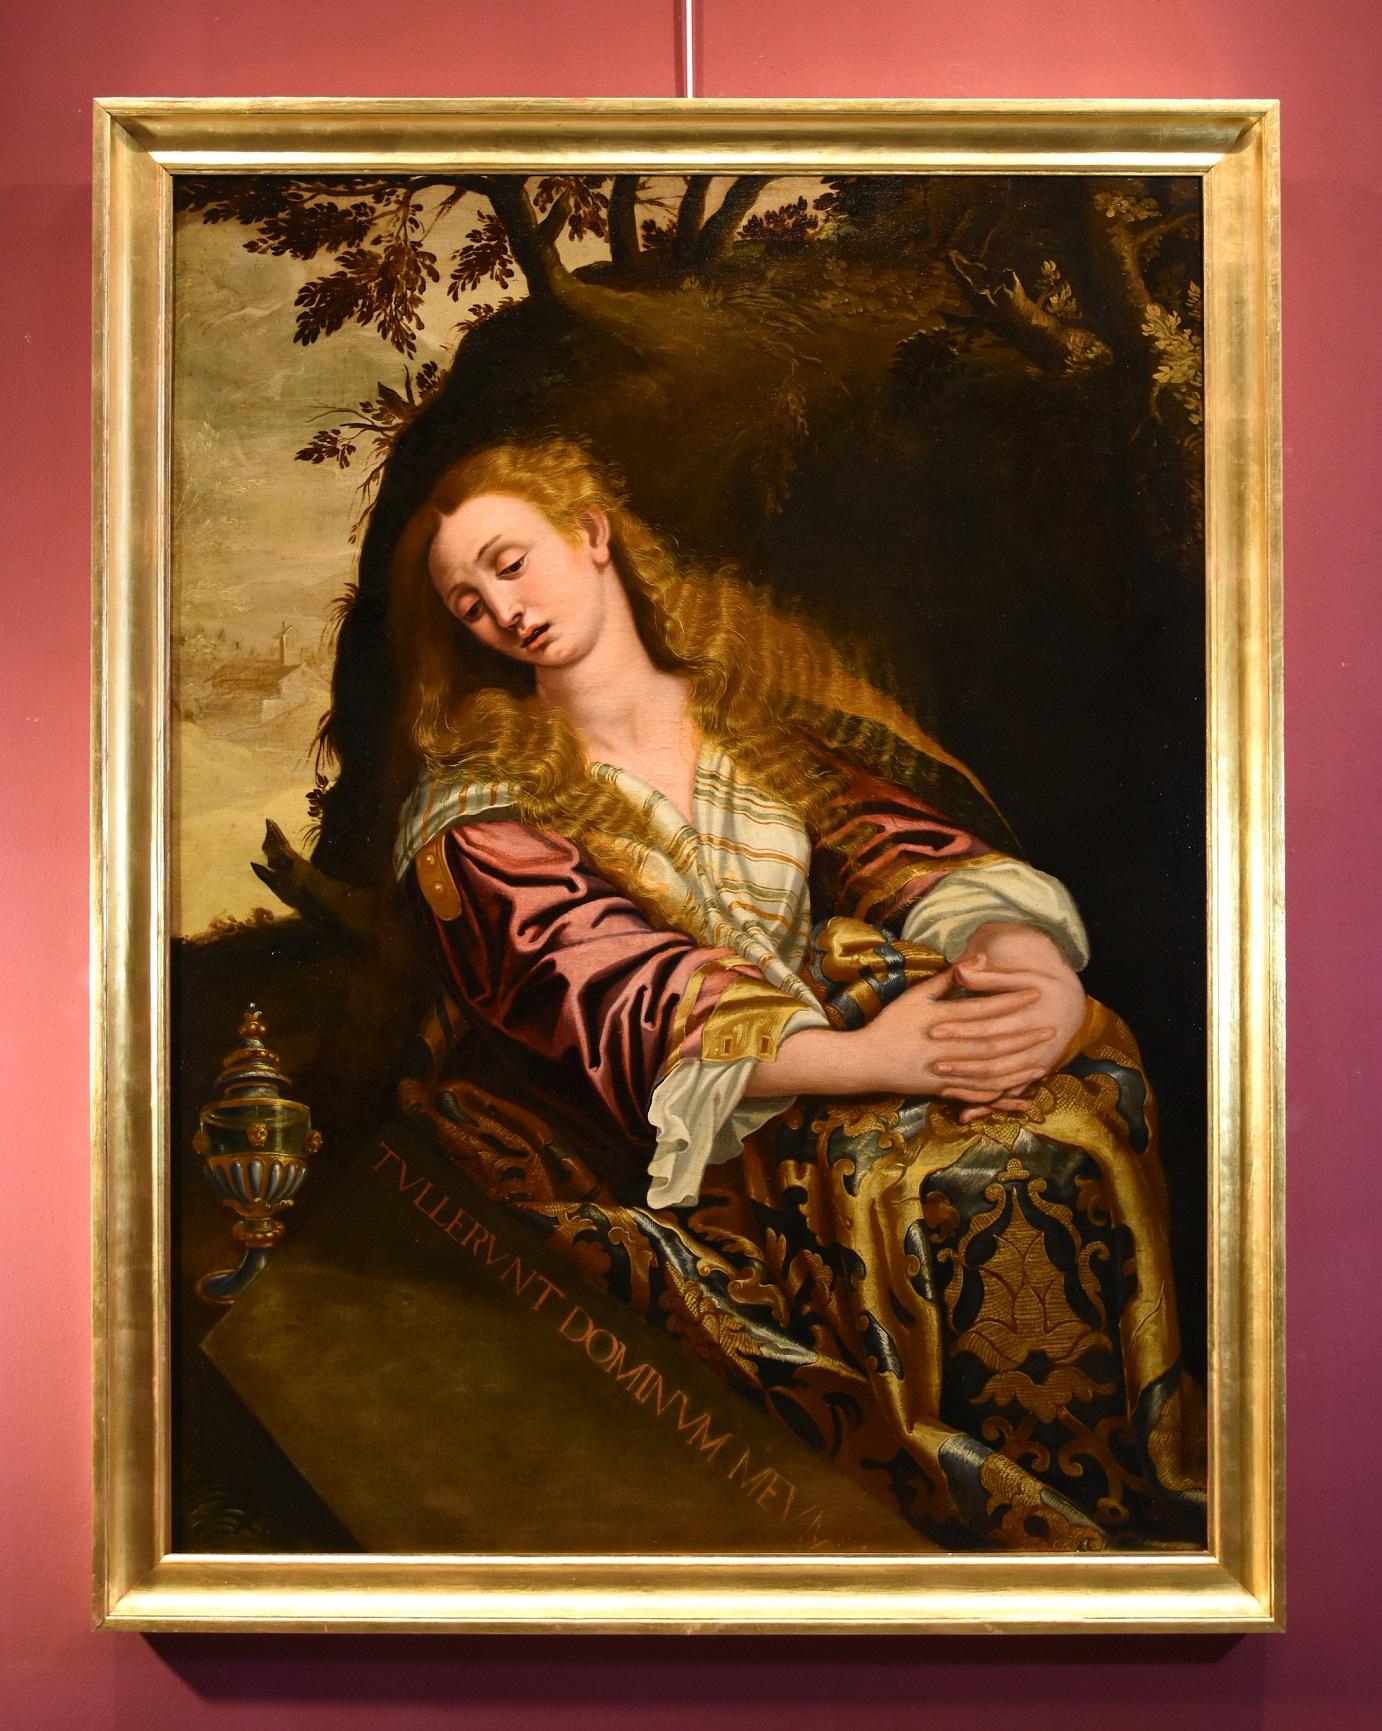 Mary Magdalena Pulzone Paint oil on canvas 17th Century Old master Portrait Art  - Painting by Scipione Pulzone, known as Il Gaetano (Gaeta, 1544 - Rome, 1598) workshop of